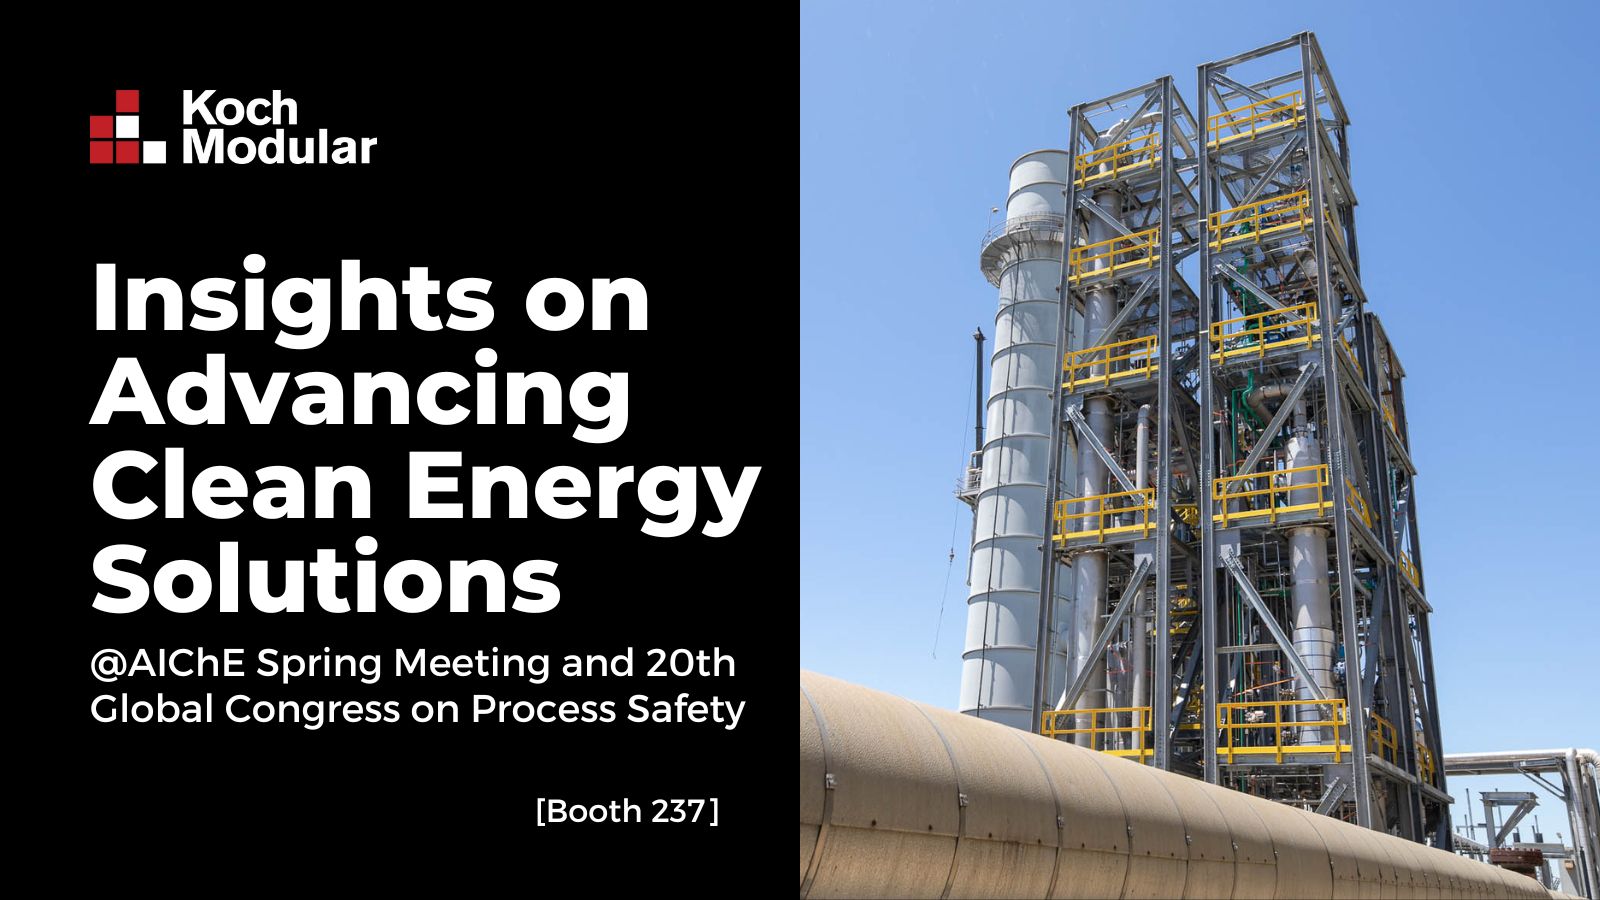 Koch Modular to Present Insights on Advancing Clean Energy Solutions at AIChE Spring Meeting